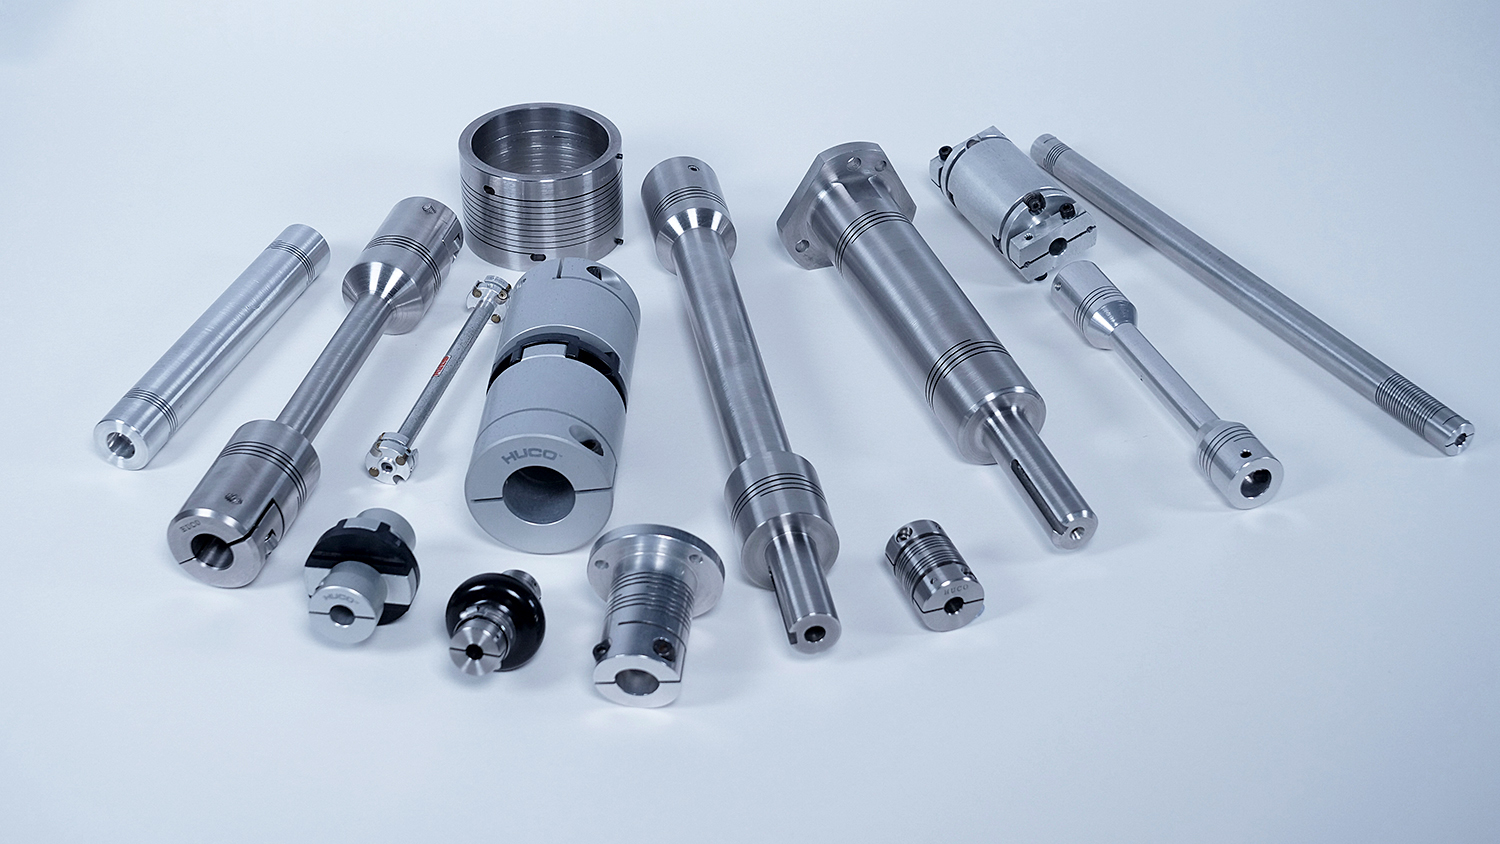 Huco offers a comprehensive range of standard and customised couplings designed for most applications